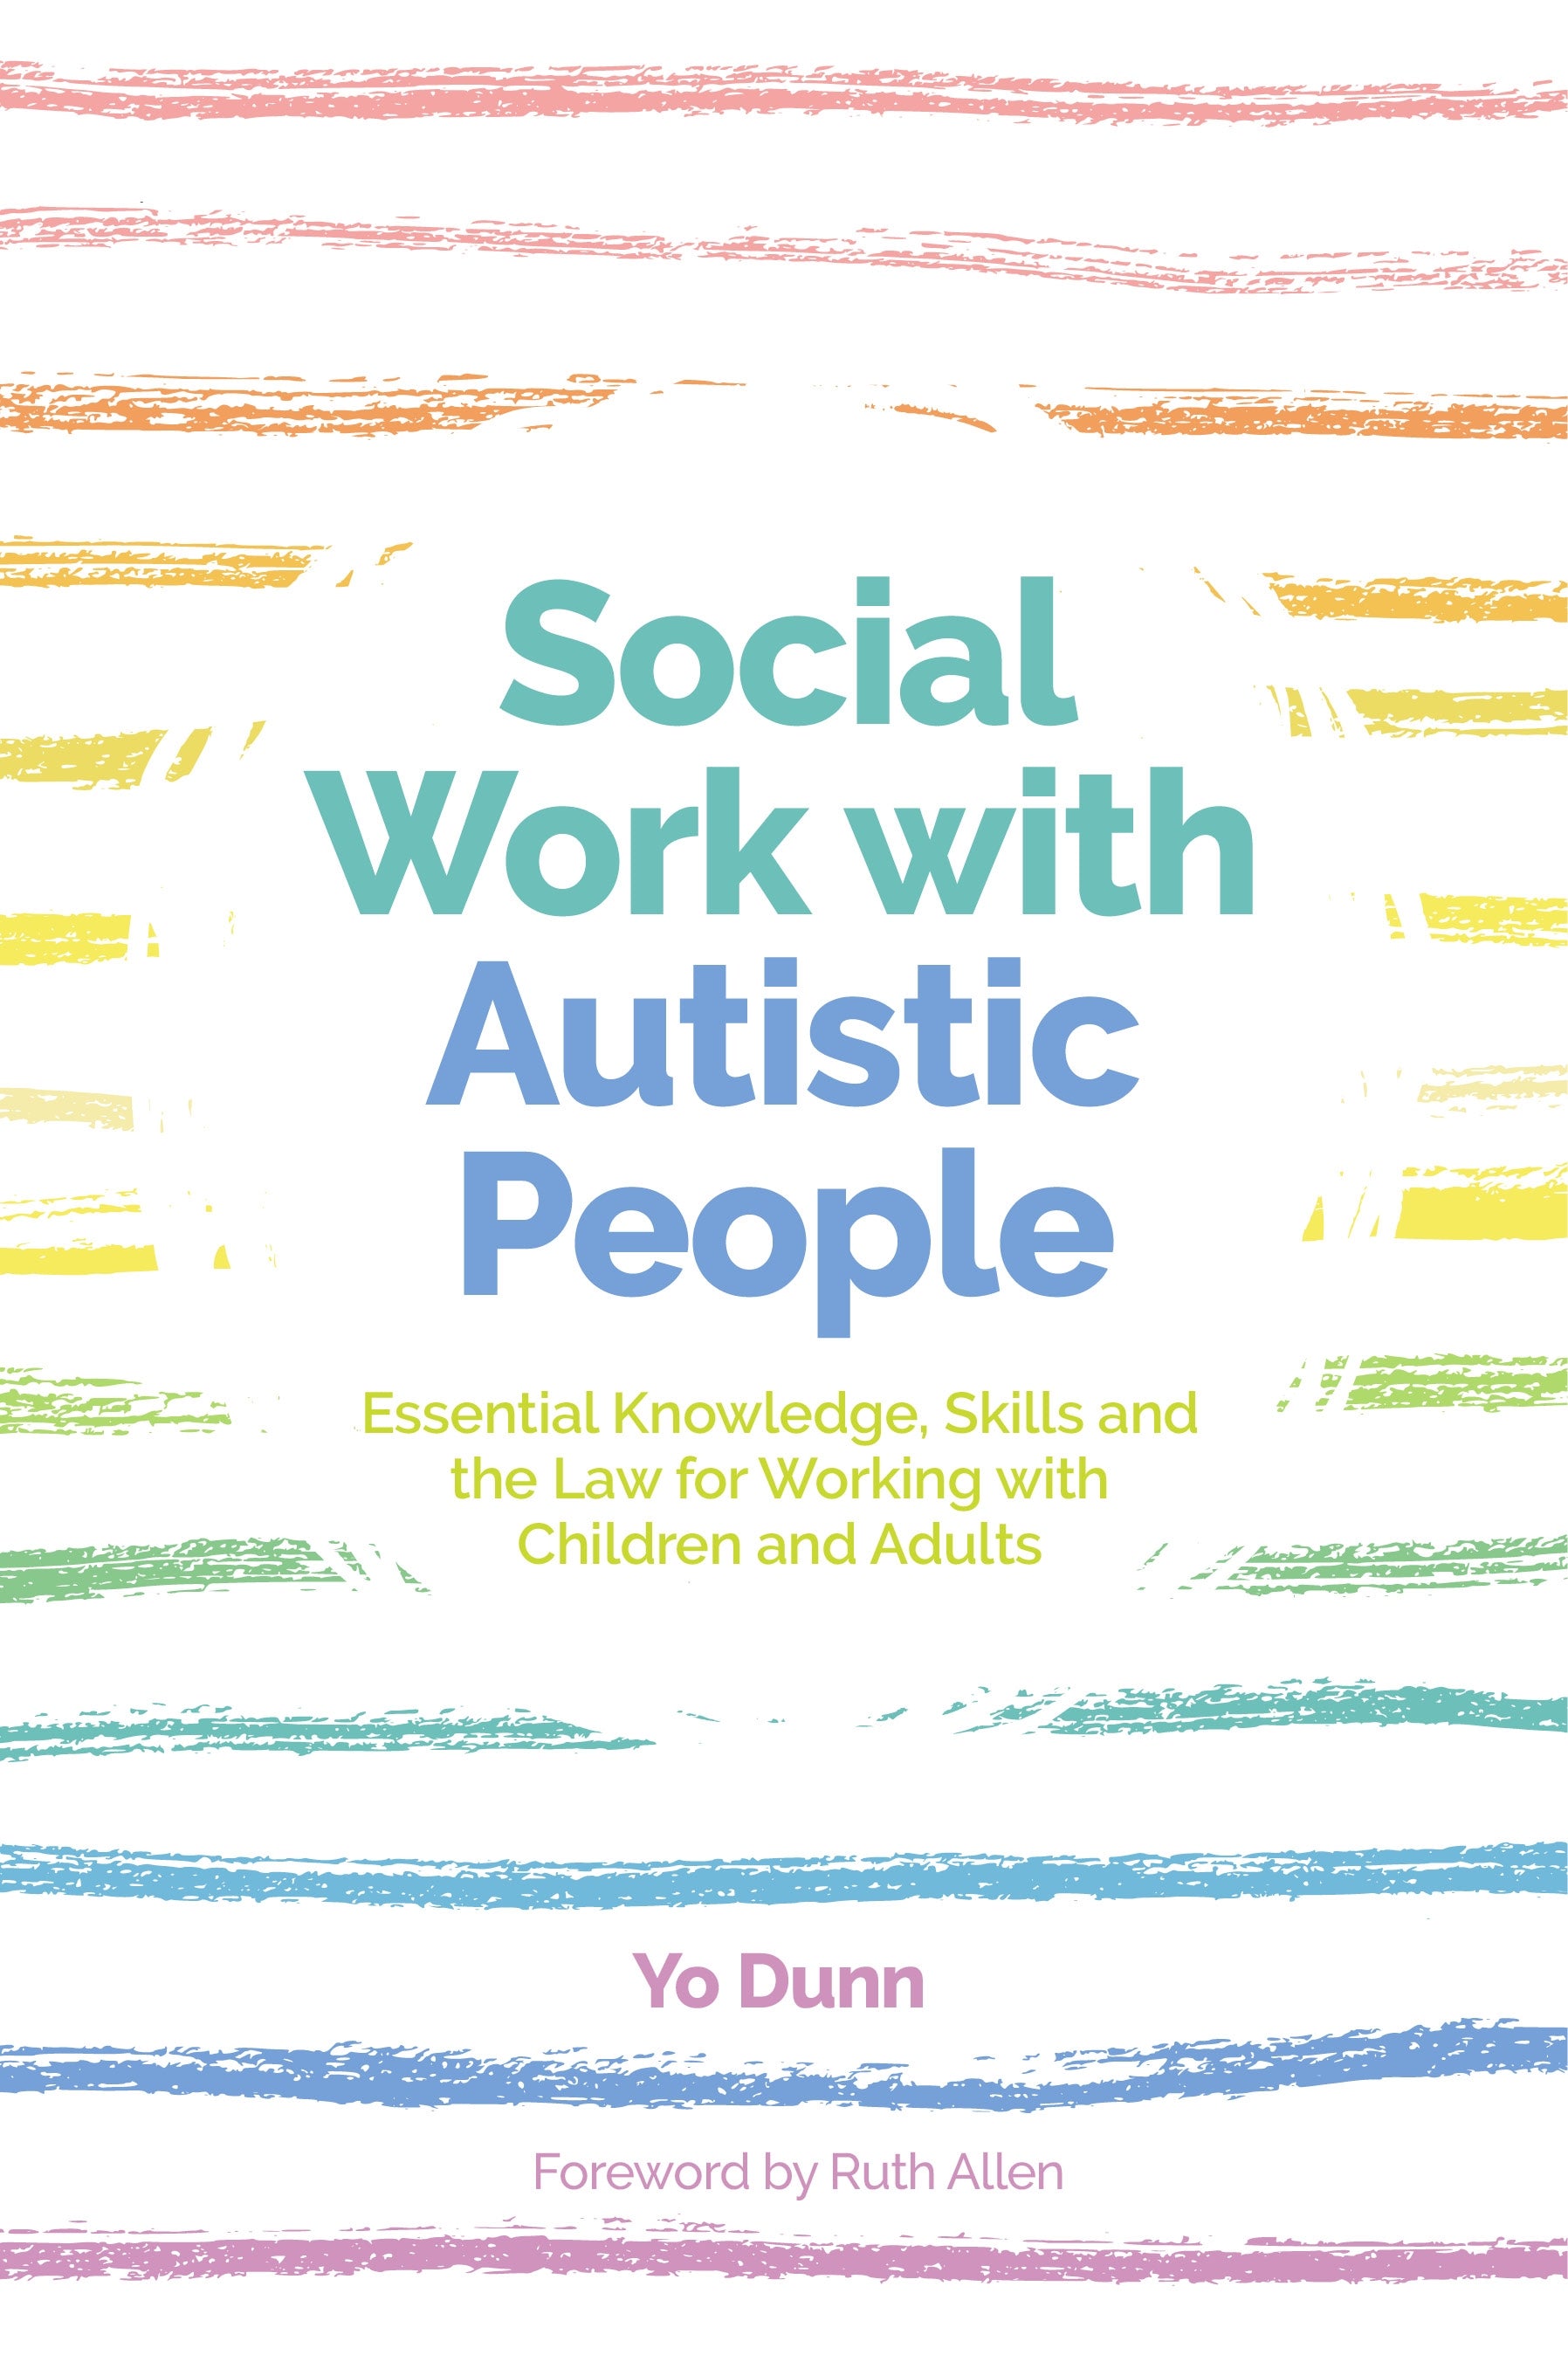 Social Work with Autistic People by Alex Ruck Ruck Keene, Ruth Allen, Yo Dunn